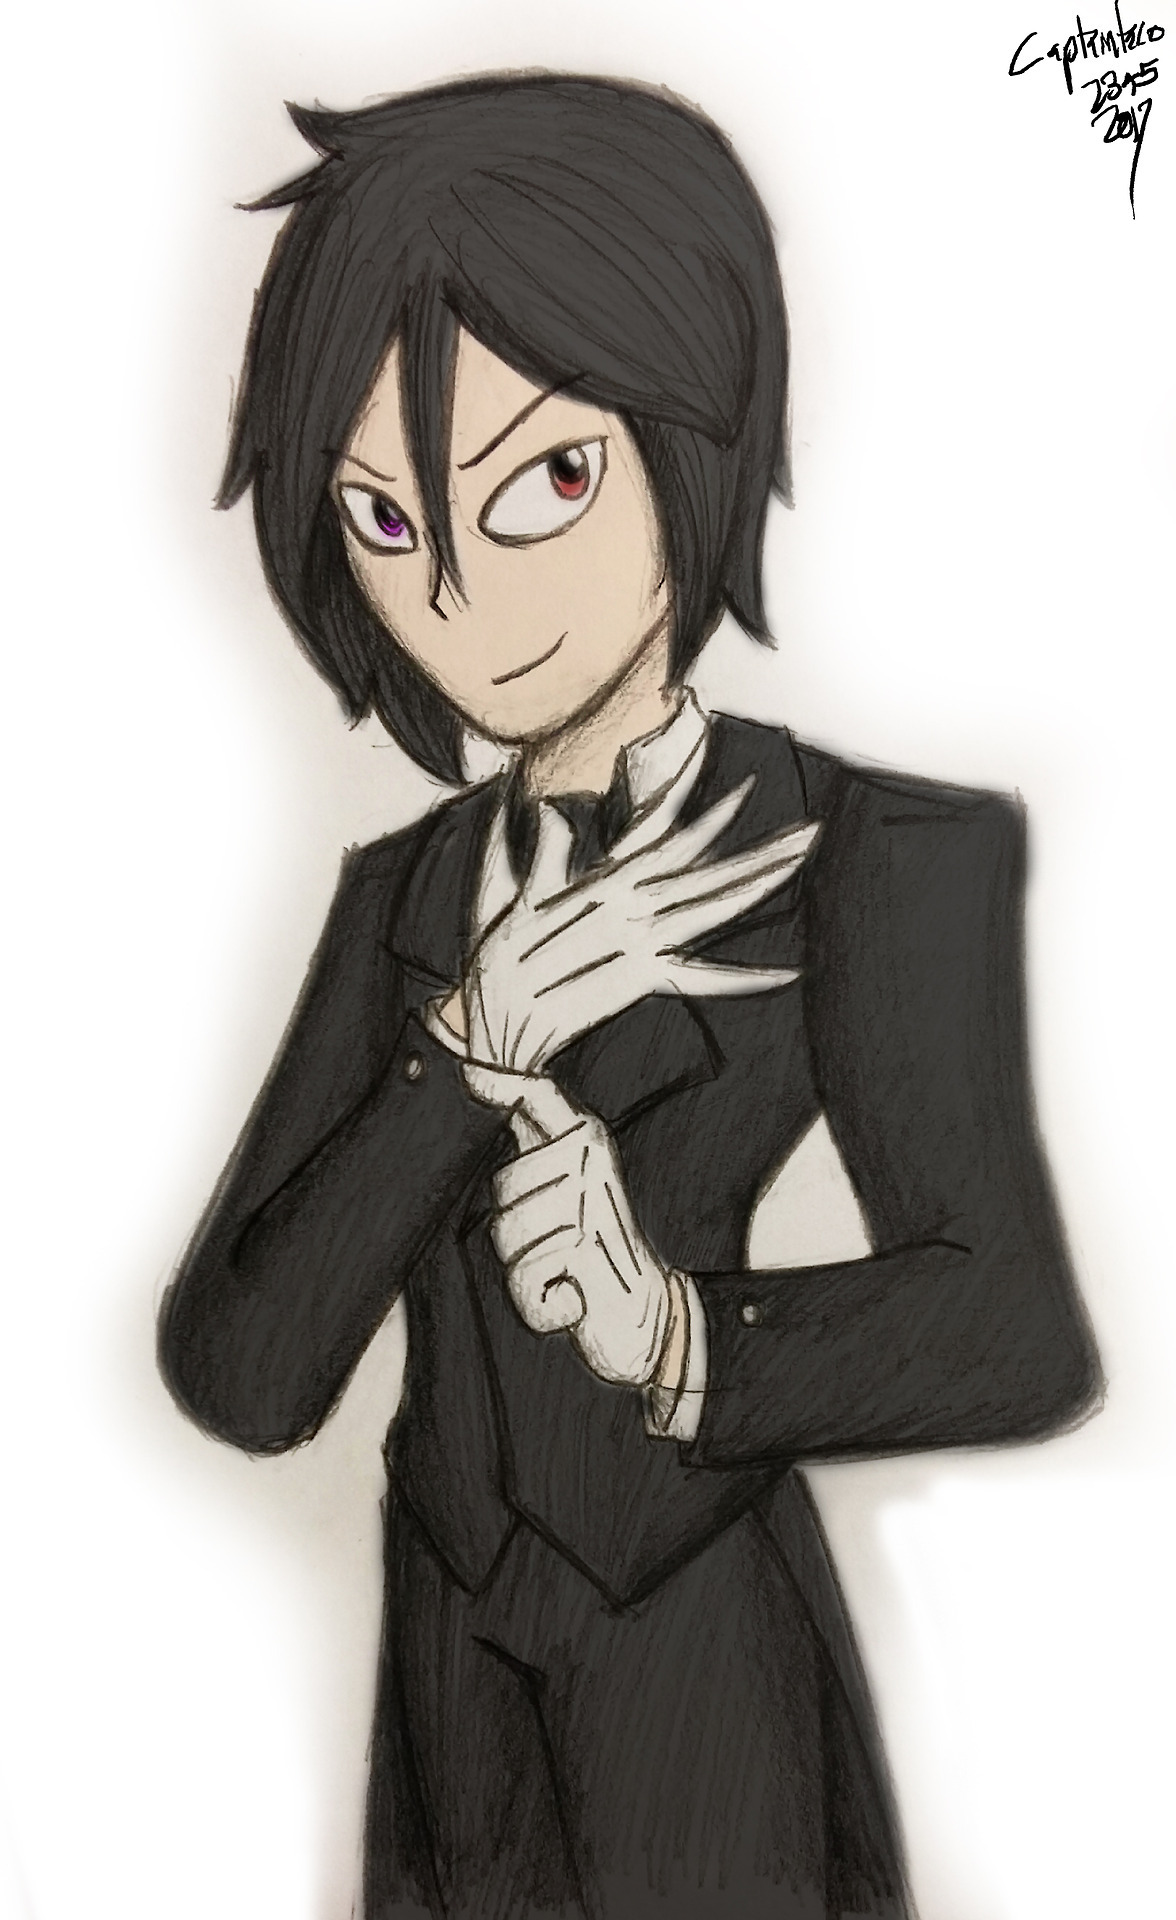 I did the sketch of Sebastian Michaelis in class, and then coloured it. I think it